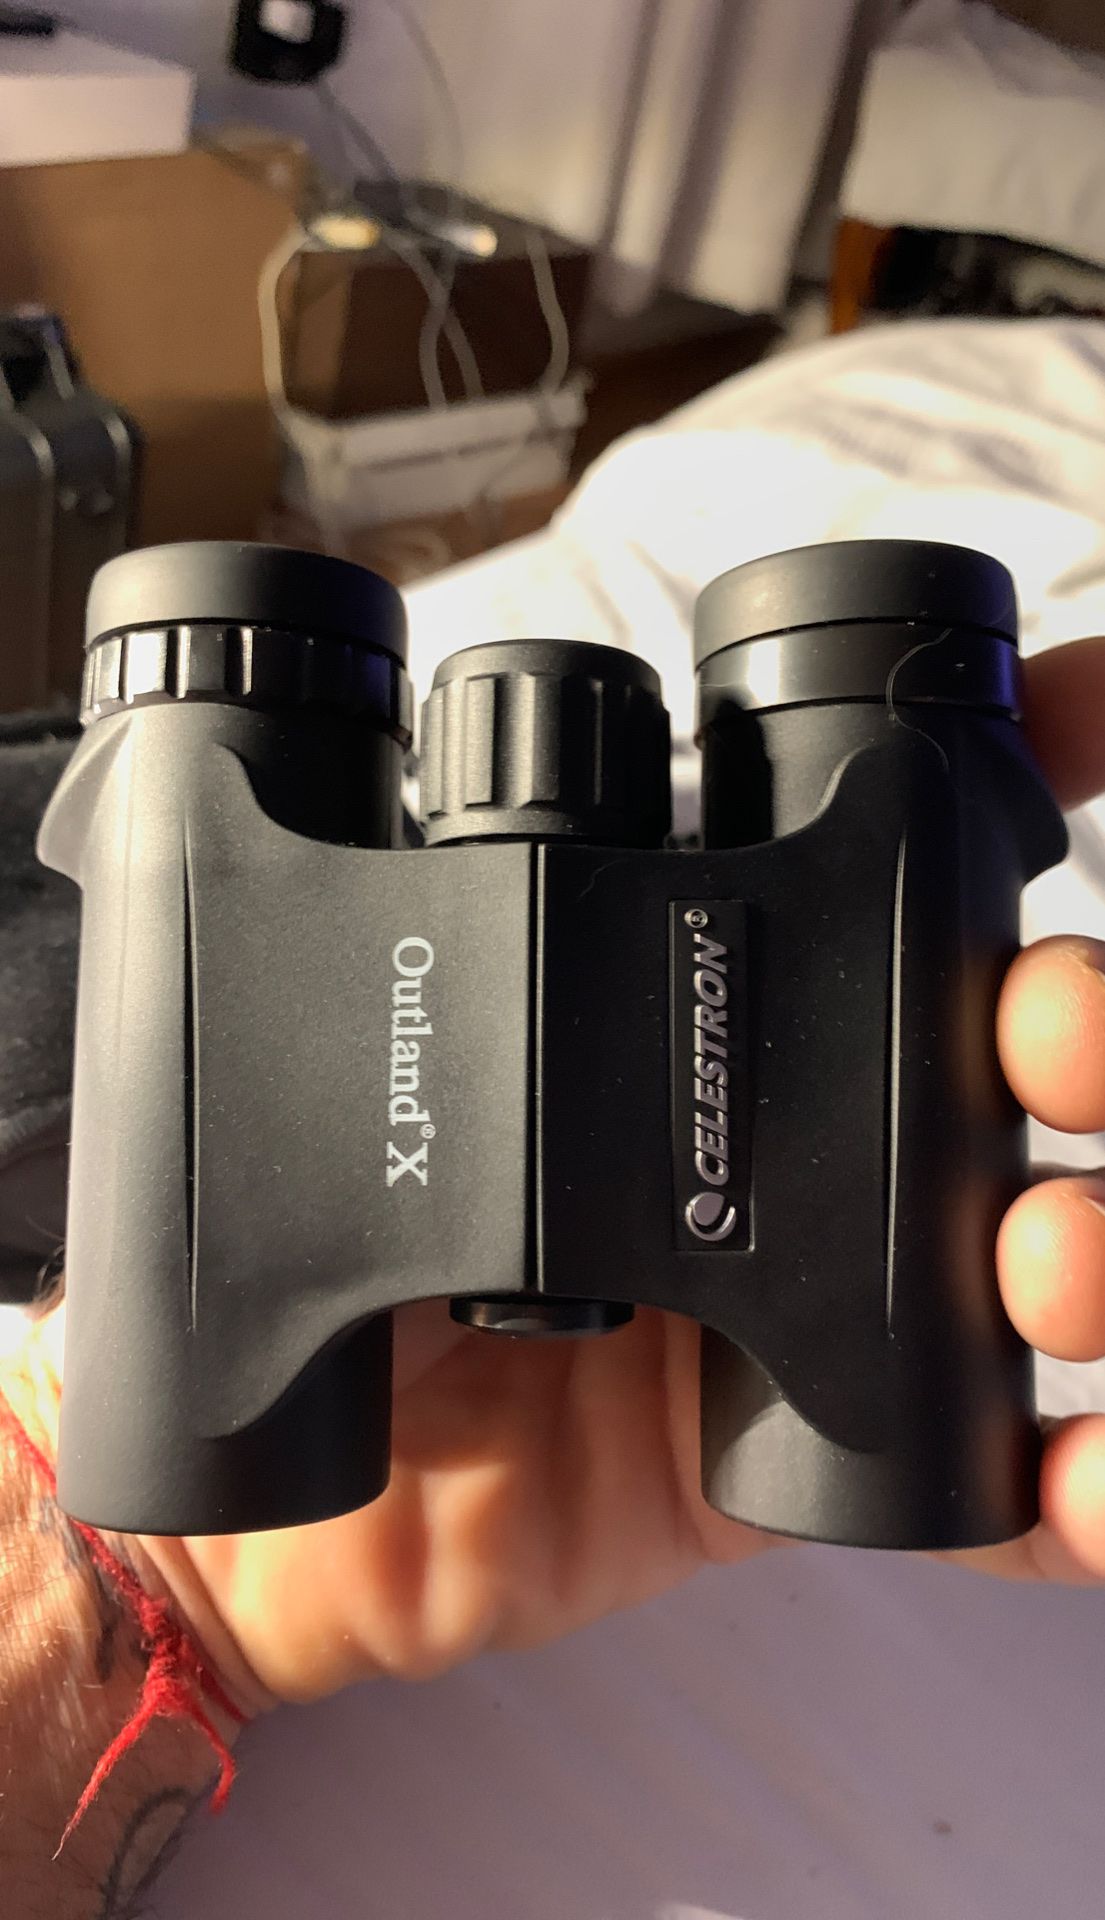 They are binoculars made by Celestron the brand is the Outland ask and it’s a 8 x 25